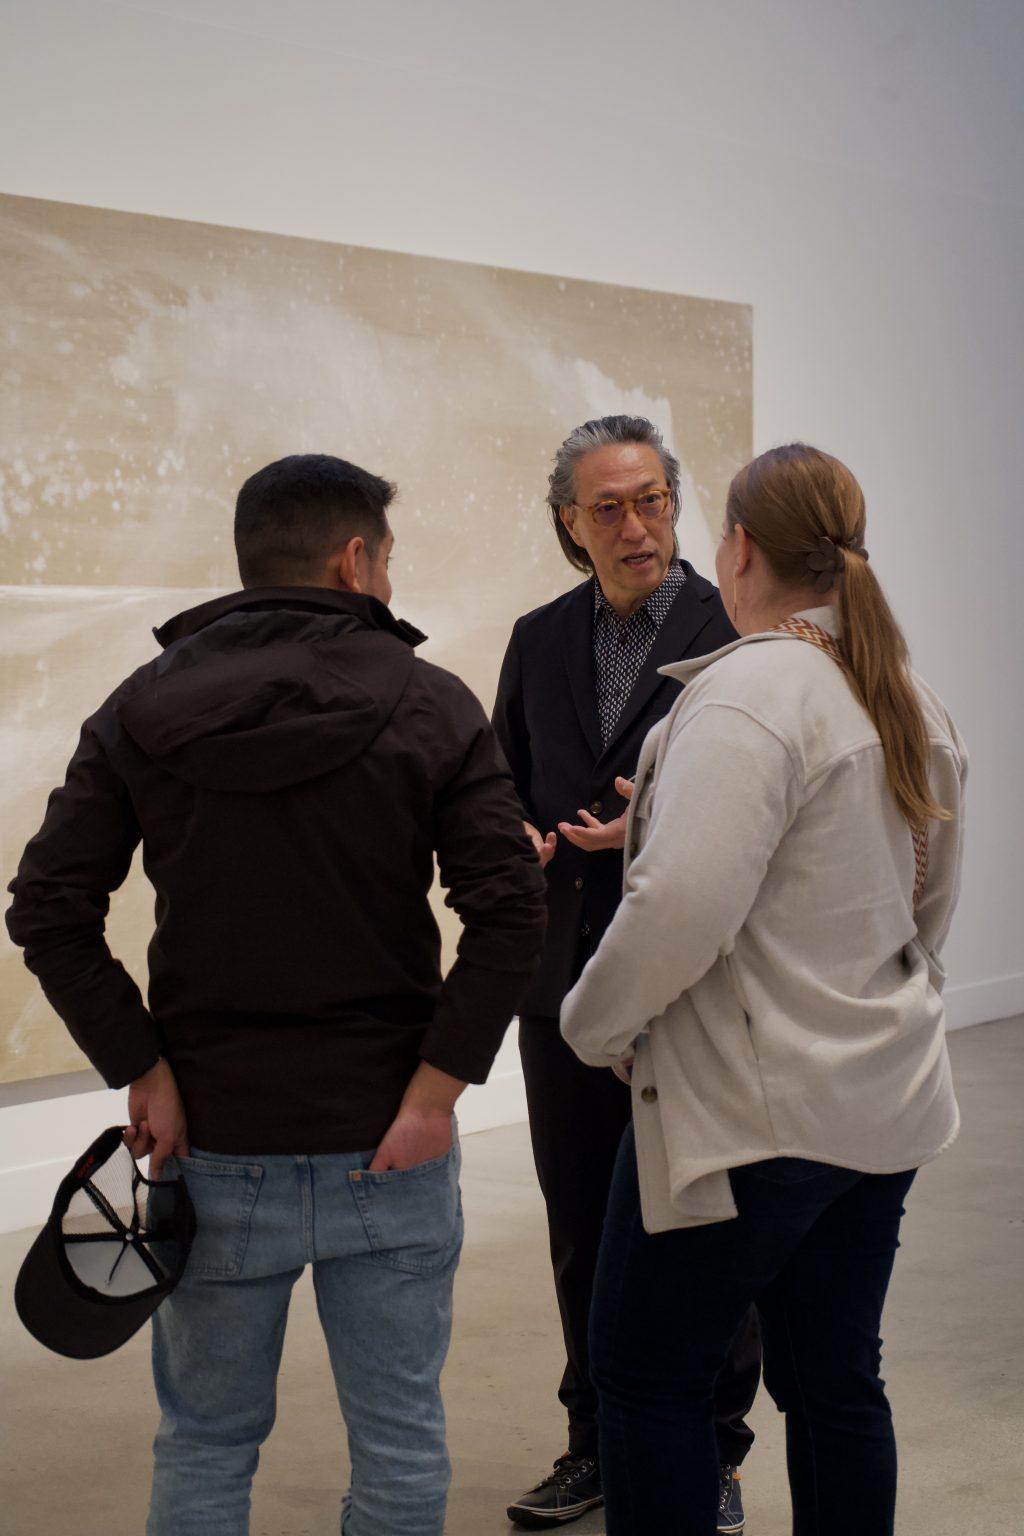 Fujimura discusses "Sea Beyond" with two observers Jan. 20, in the Weisman Museum. The massive triptych took up an entire wall within the Weisman Museum.